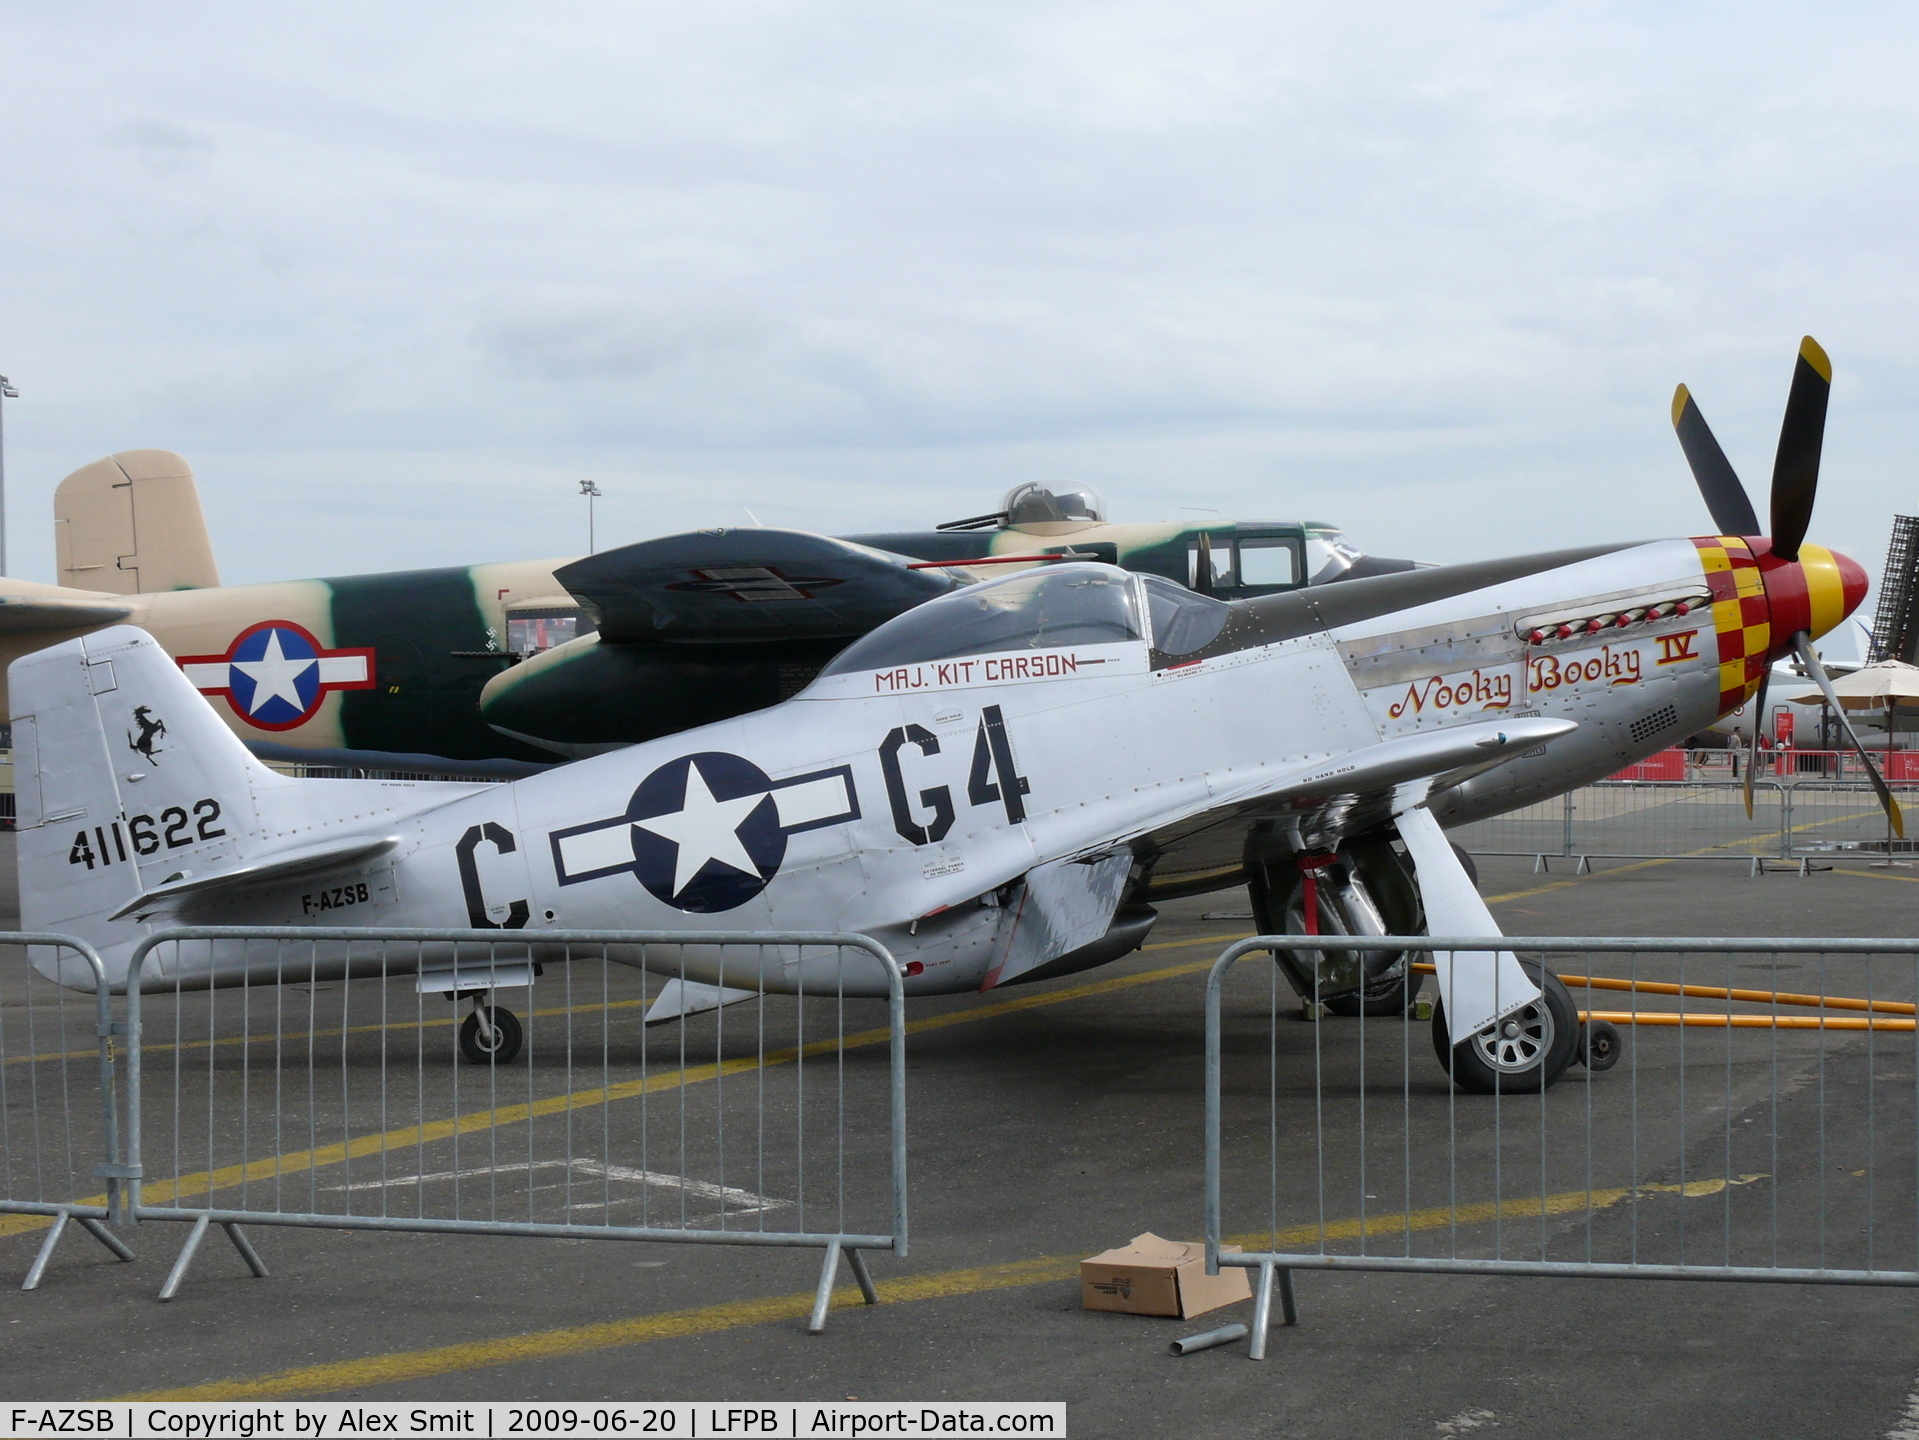 F-AZSB, 1944 North American P-51D Mustang C/N 122-40967, North American P-51D Mustang F-AZSB Societe de development & promotion d'aviation painted as US Air Force 44-11622/G4-C Nooky Booky IV